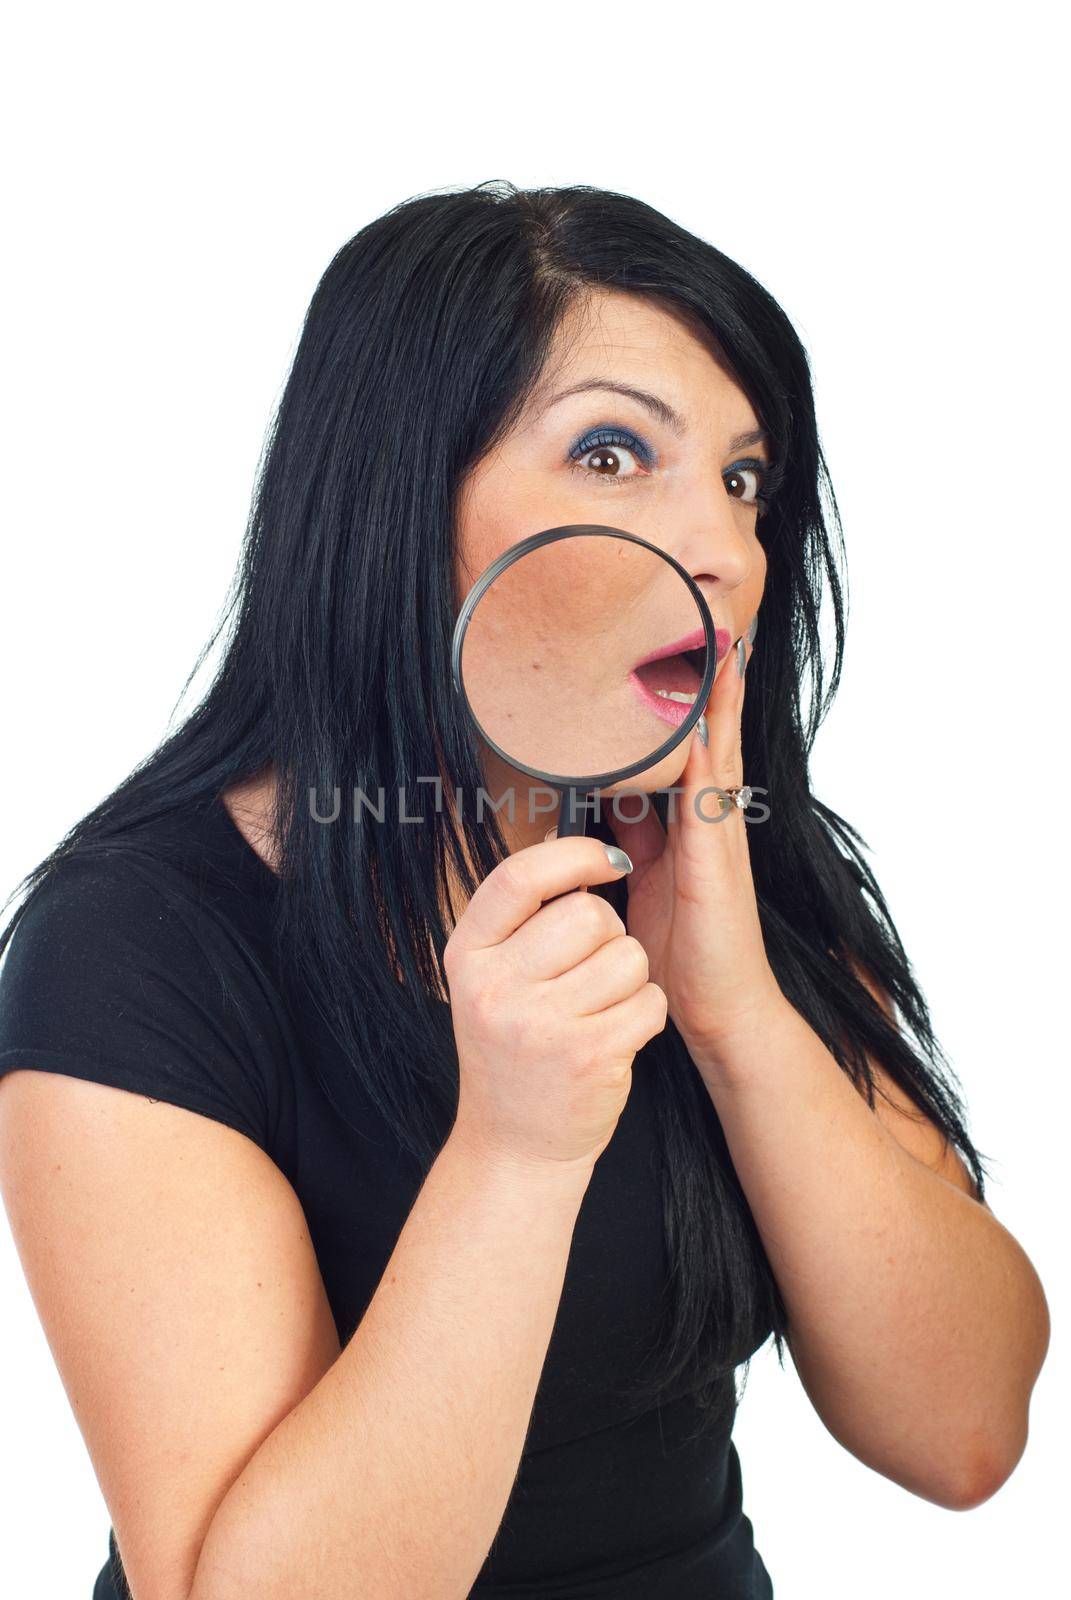 Scared woman with acne holding a magnyfing glass and checchink her face in the mirror isolated on white backgroun